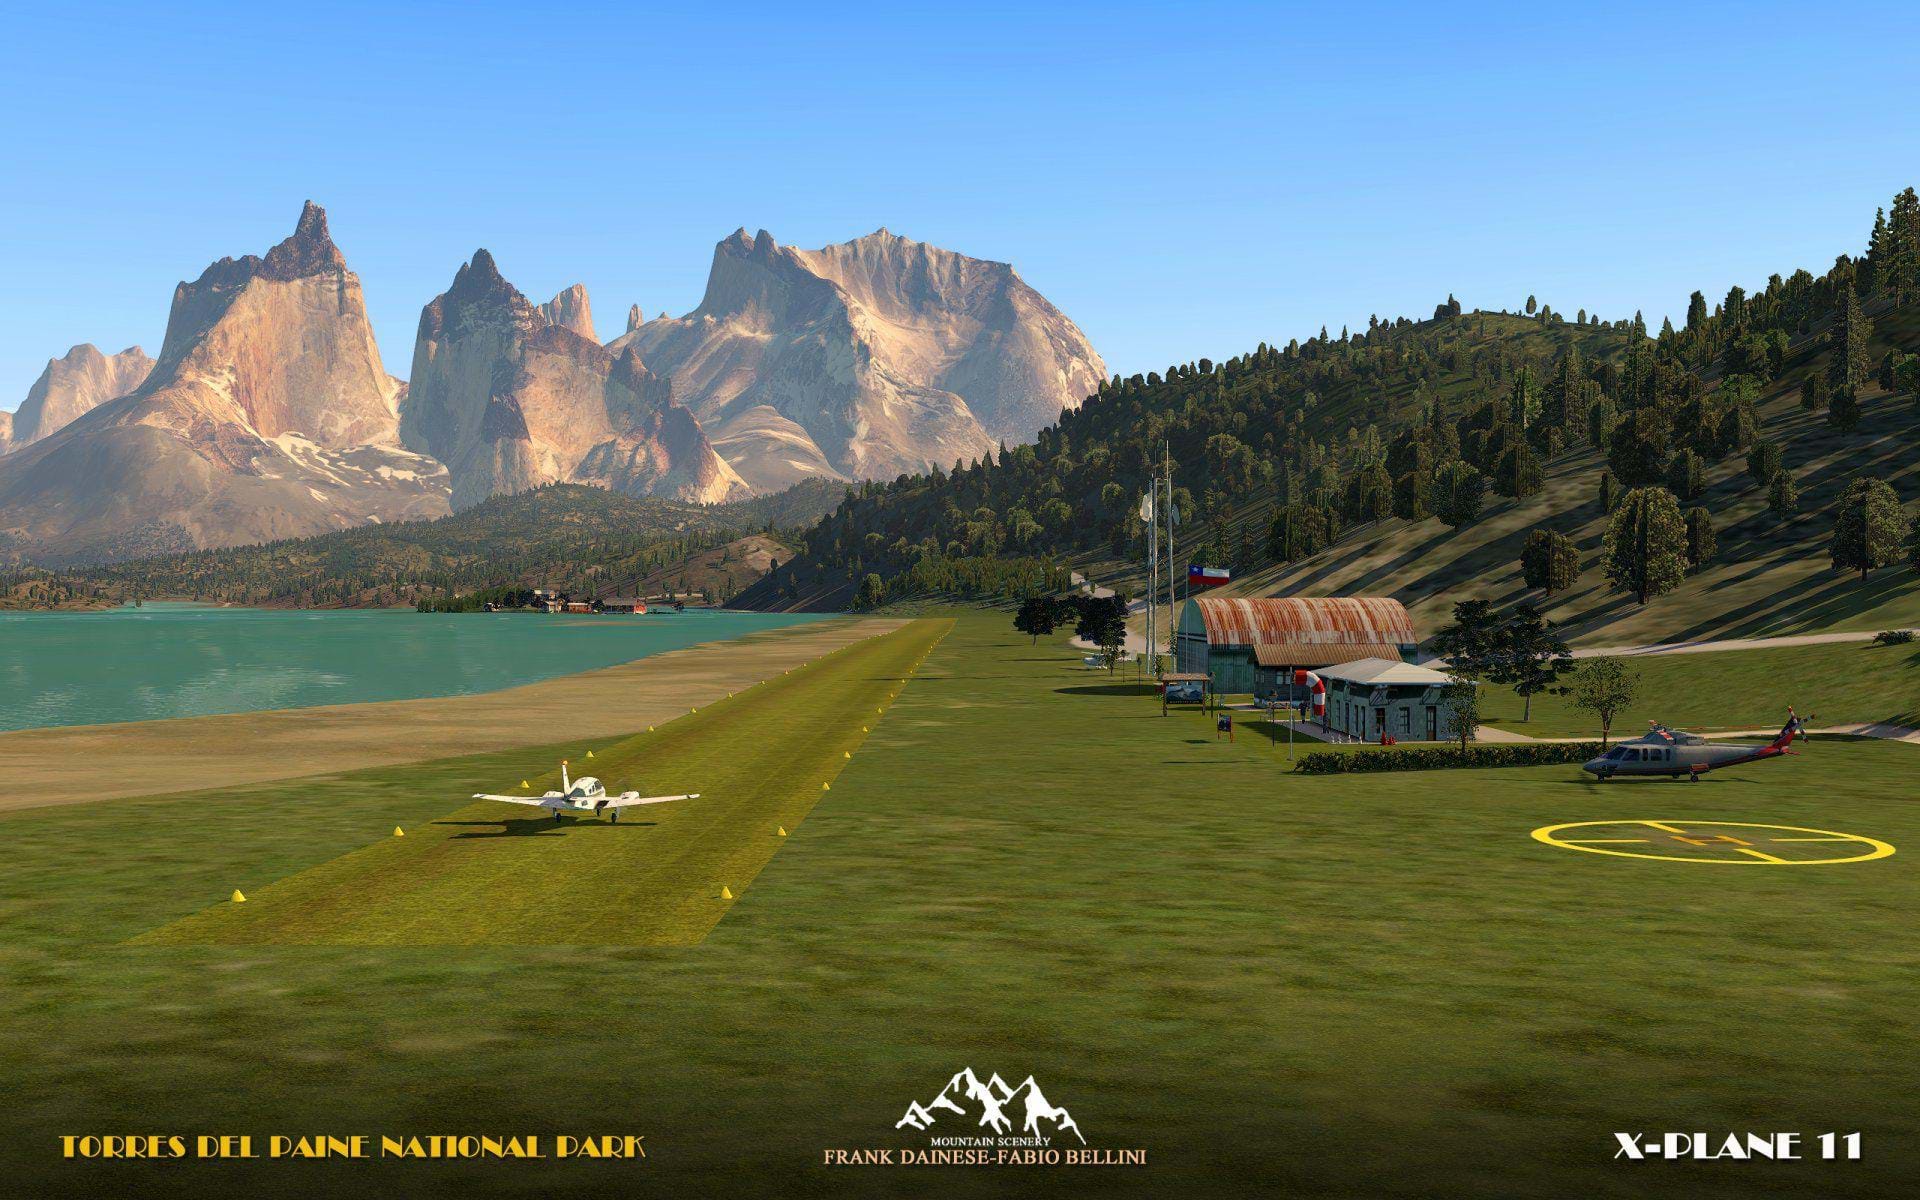 Frank Dainese and Fabio Bellini - Torres del Paine National Park for X-Plane